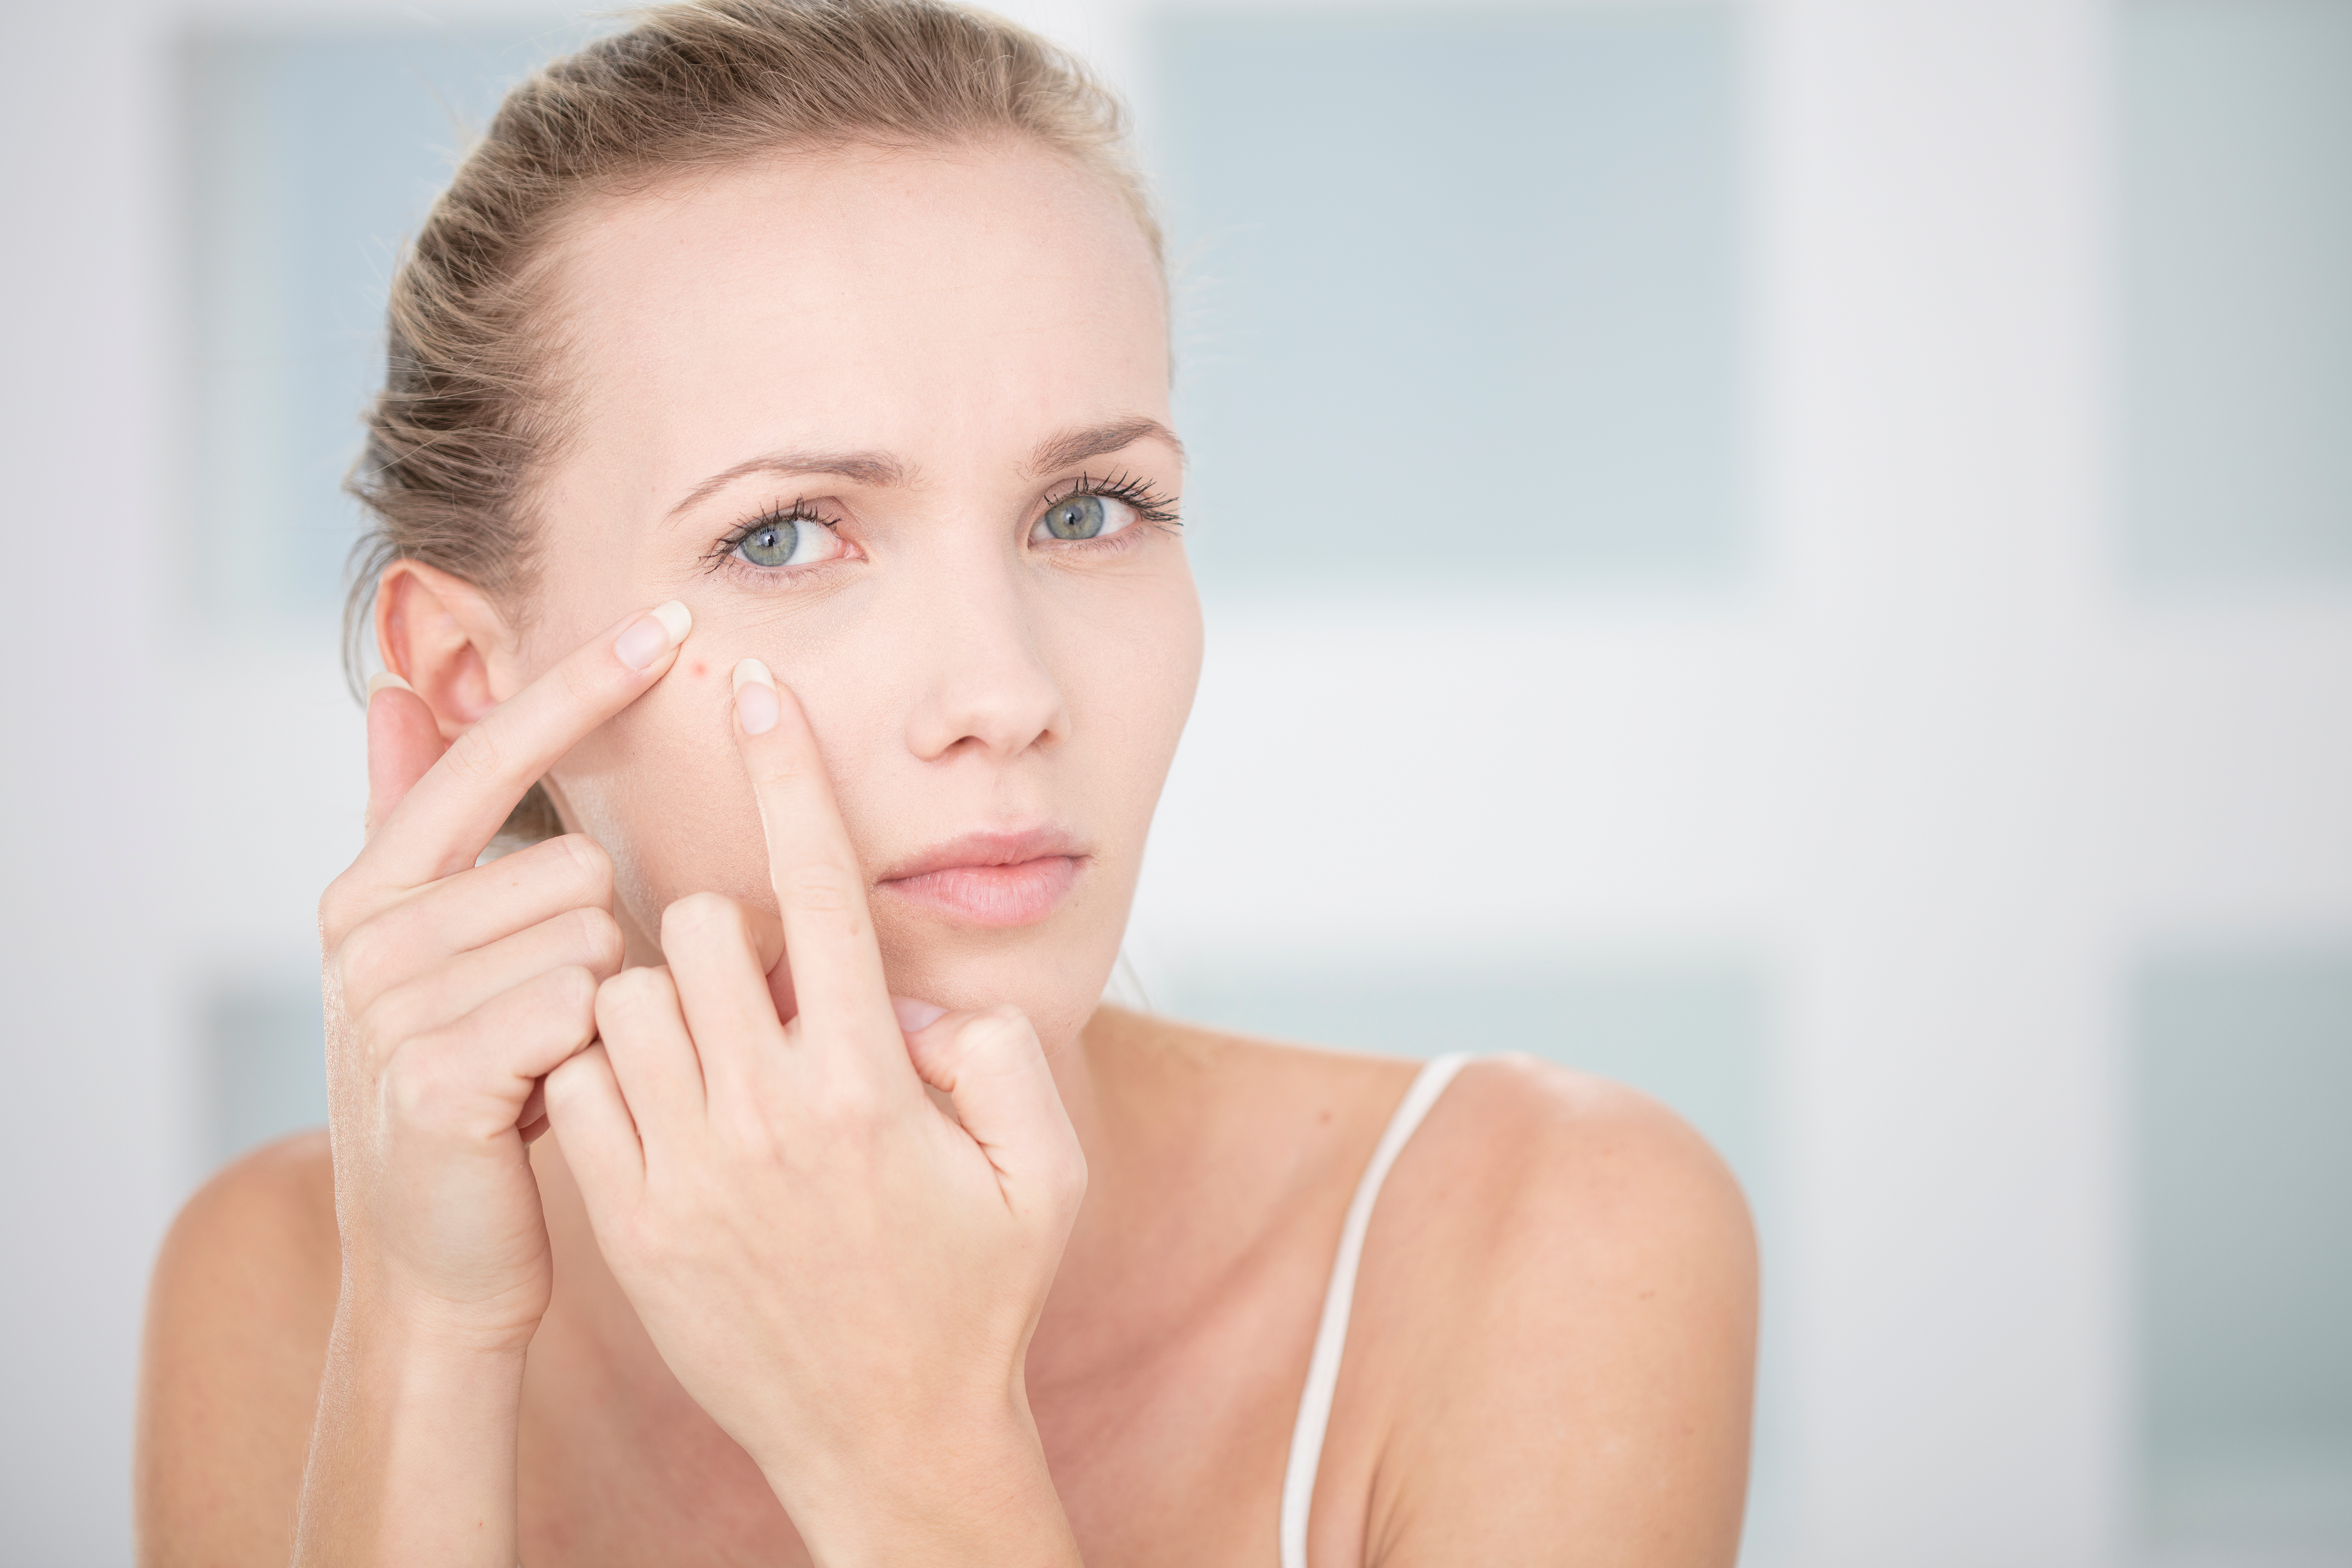 Some individuals may be predisposed to the development of acne #1